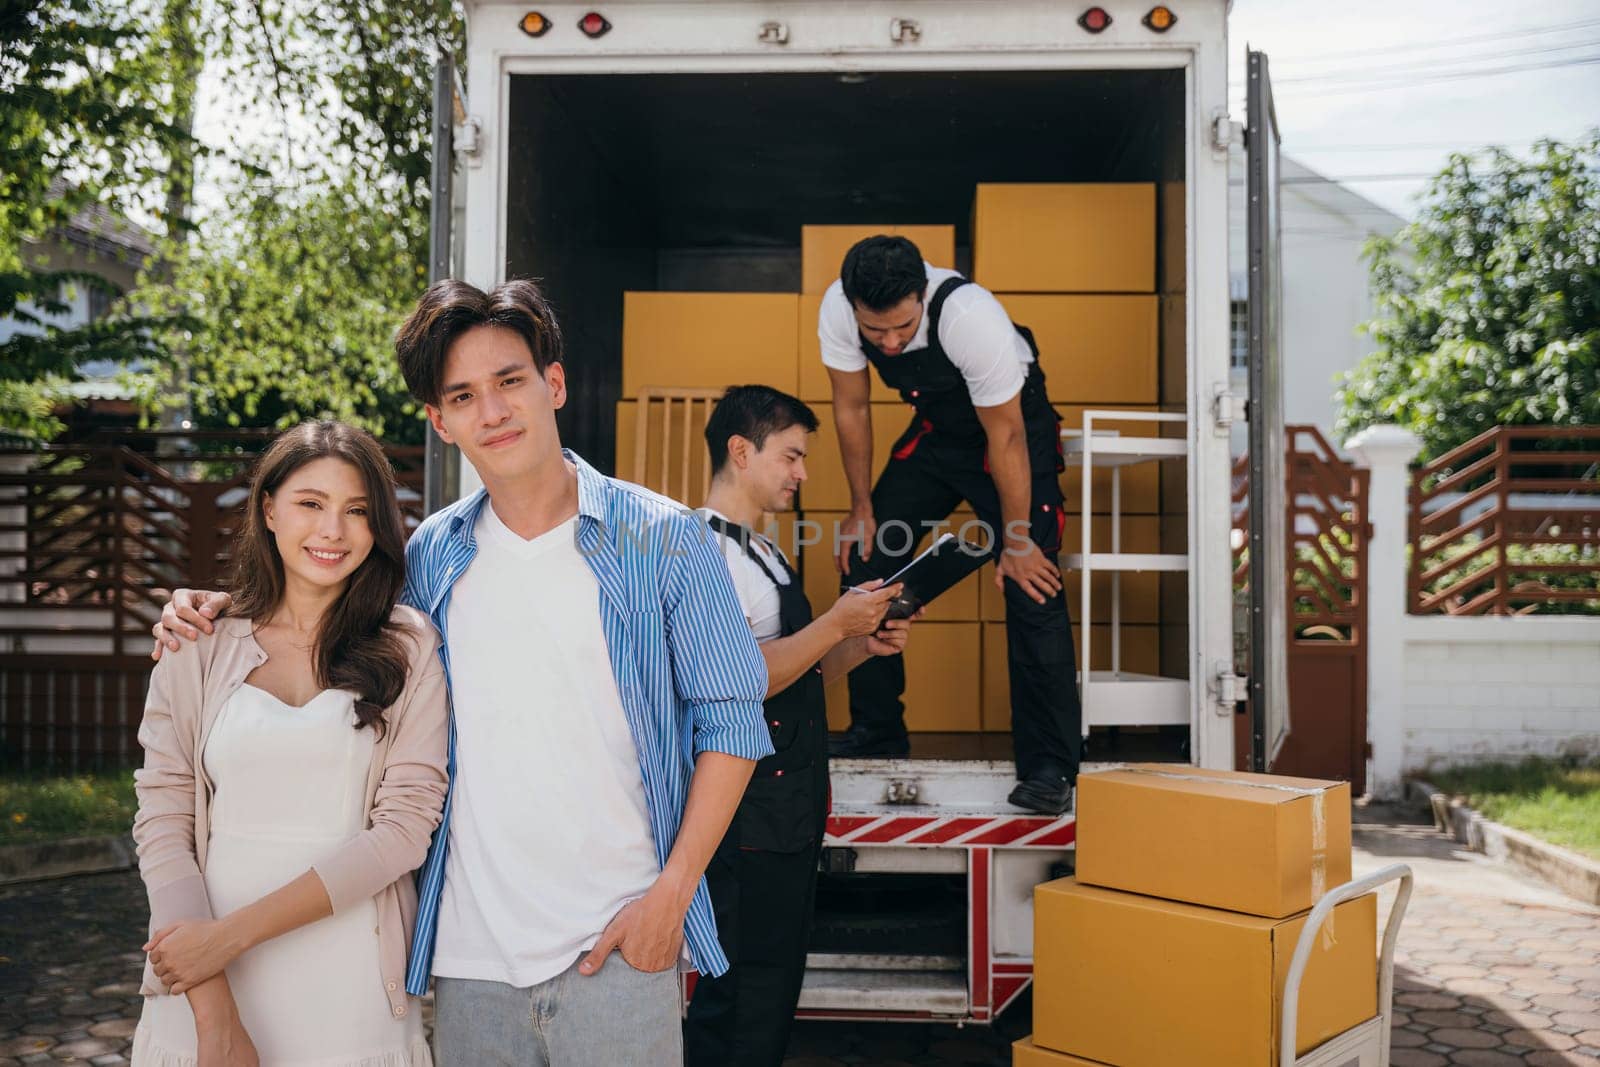 A portrait captures the smiling couple's satisfaction as professional movers load furniture onto a truck for relocation. Quality service and teamwork at work. Moving Day Concept by Sorapop